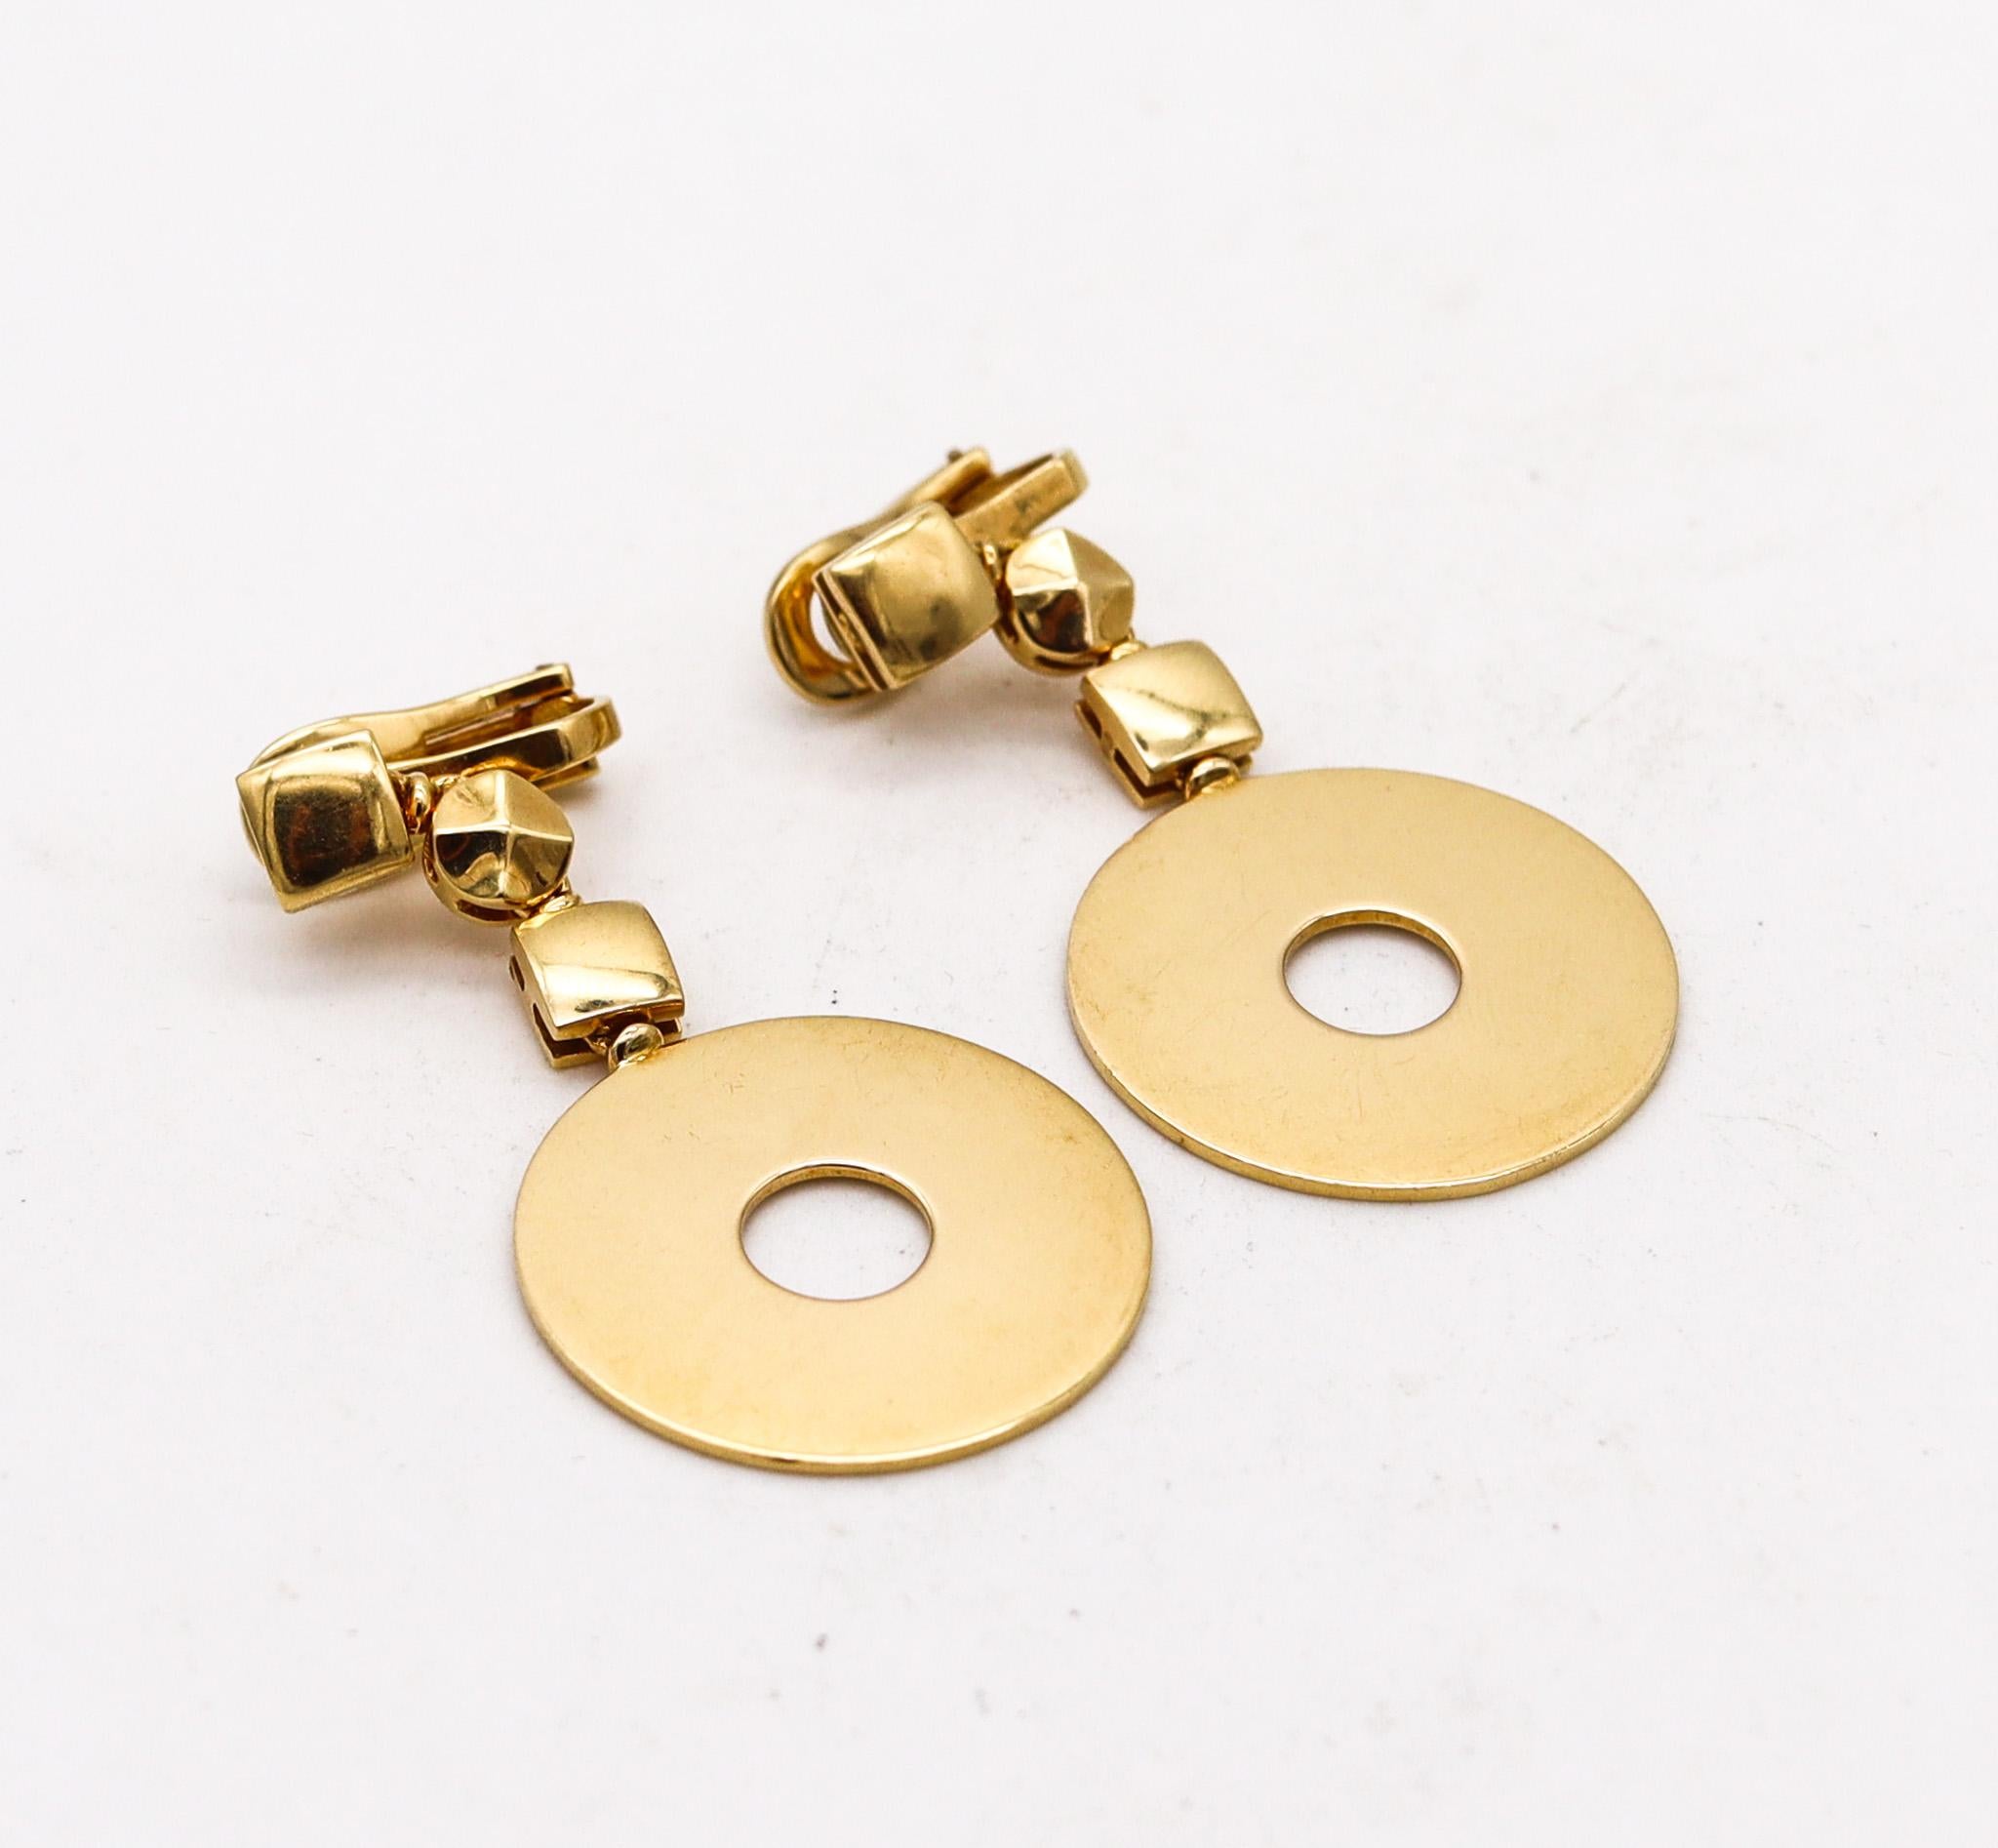 Modernist Bvlgari Roma 1970 Geometric Pair Of Dangle Drop Earrings In 18Kt Yellow Gold For Sale